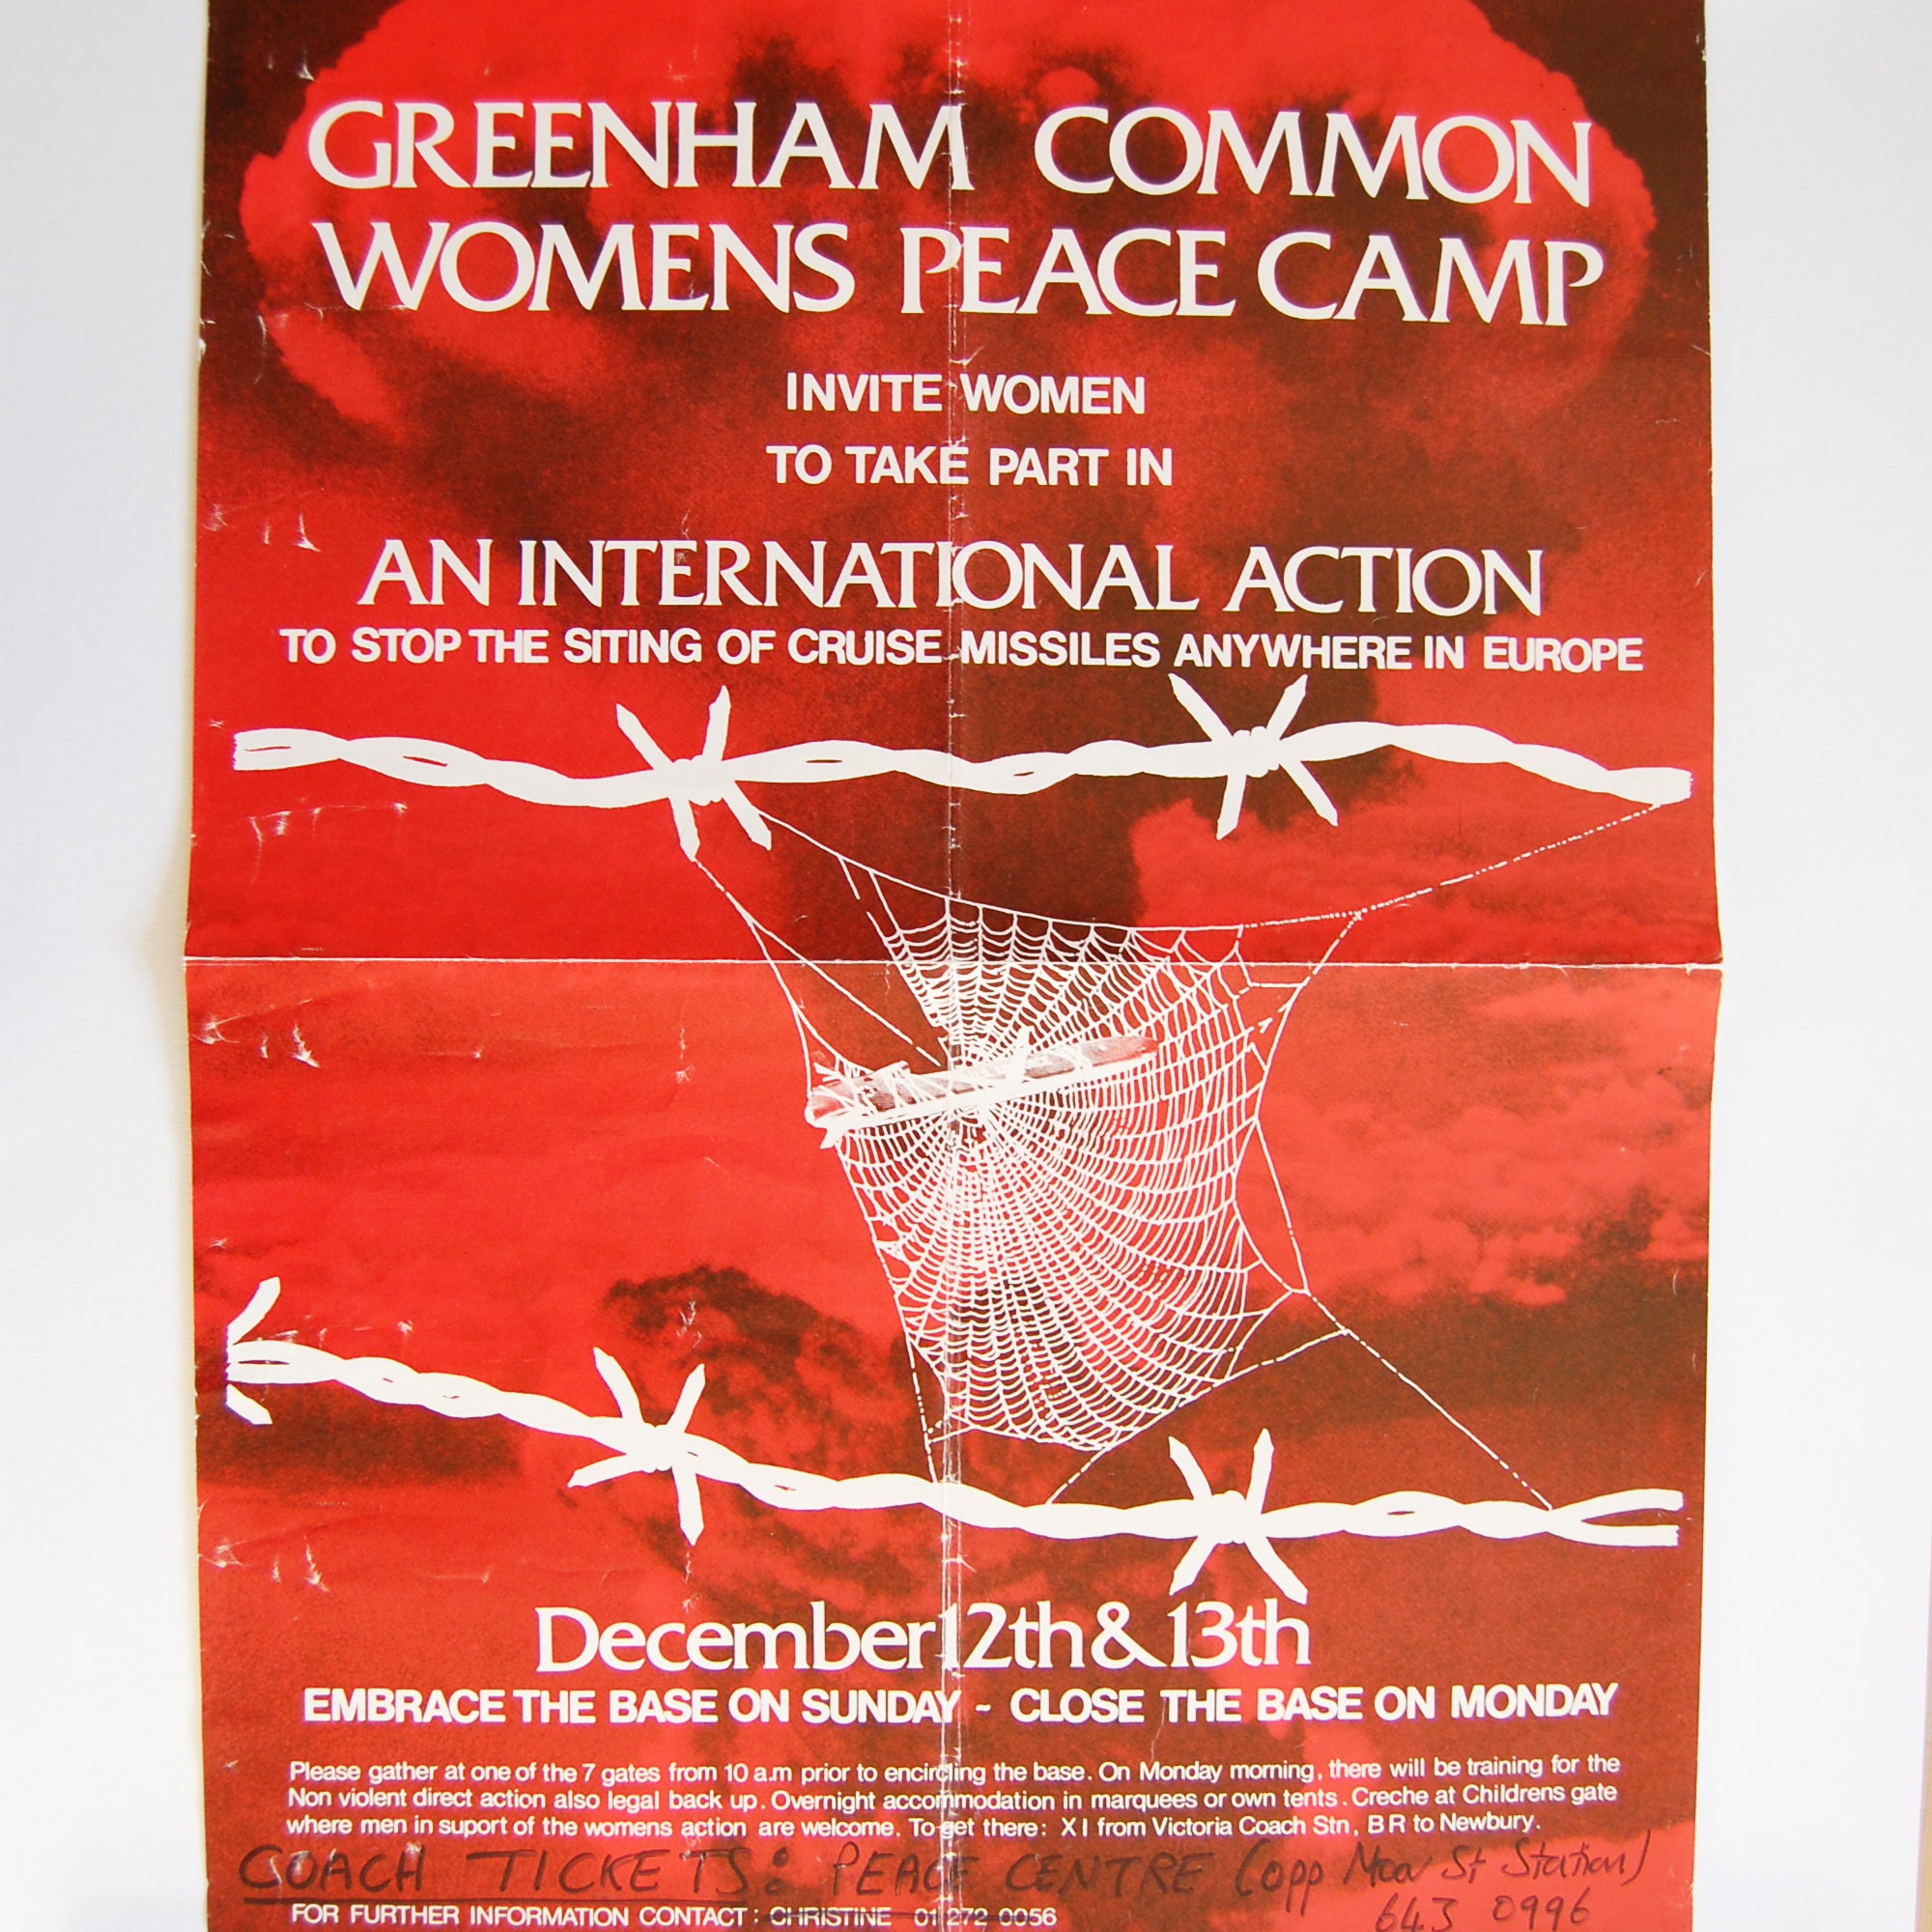 [Embrace the Base] Greenham Common Women's Peace Camp Invite Women to Take Part in an International Action